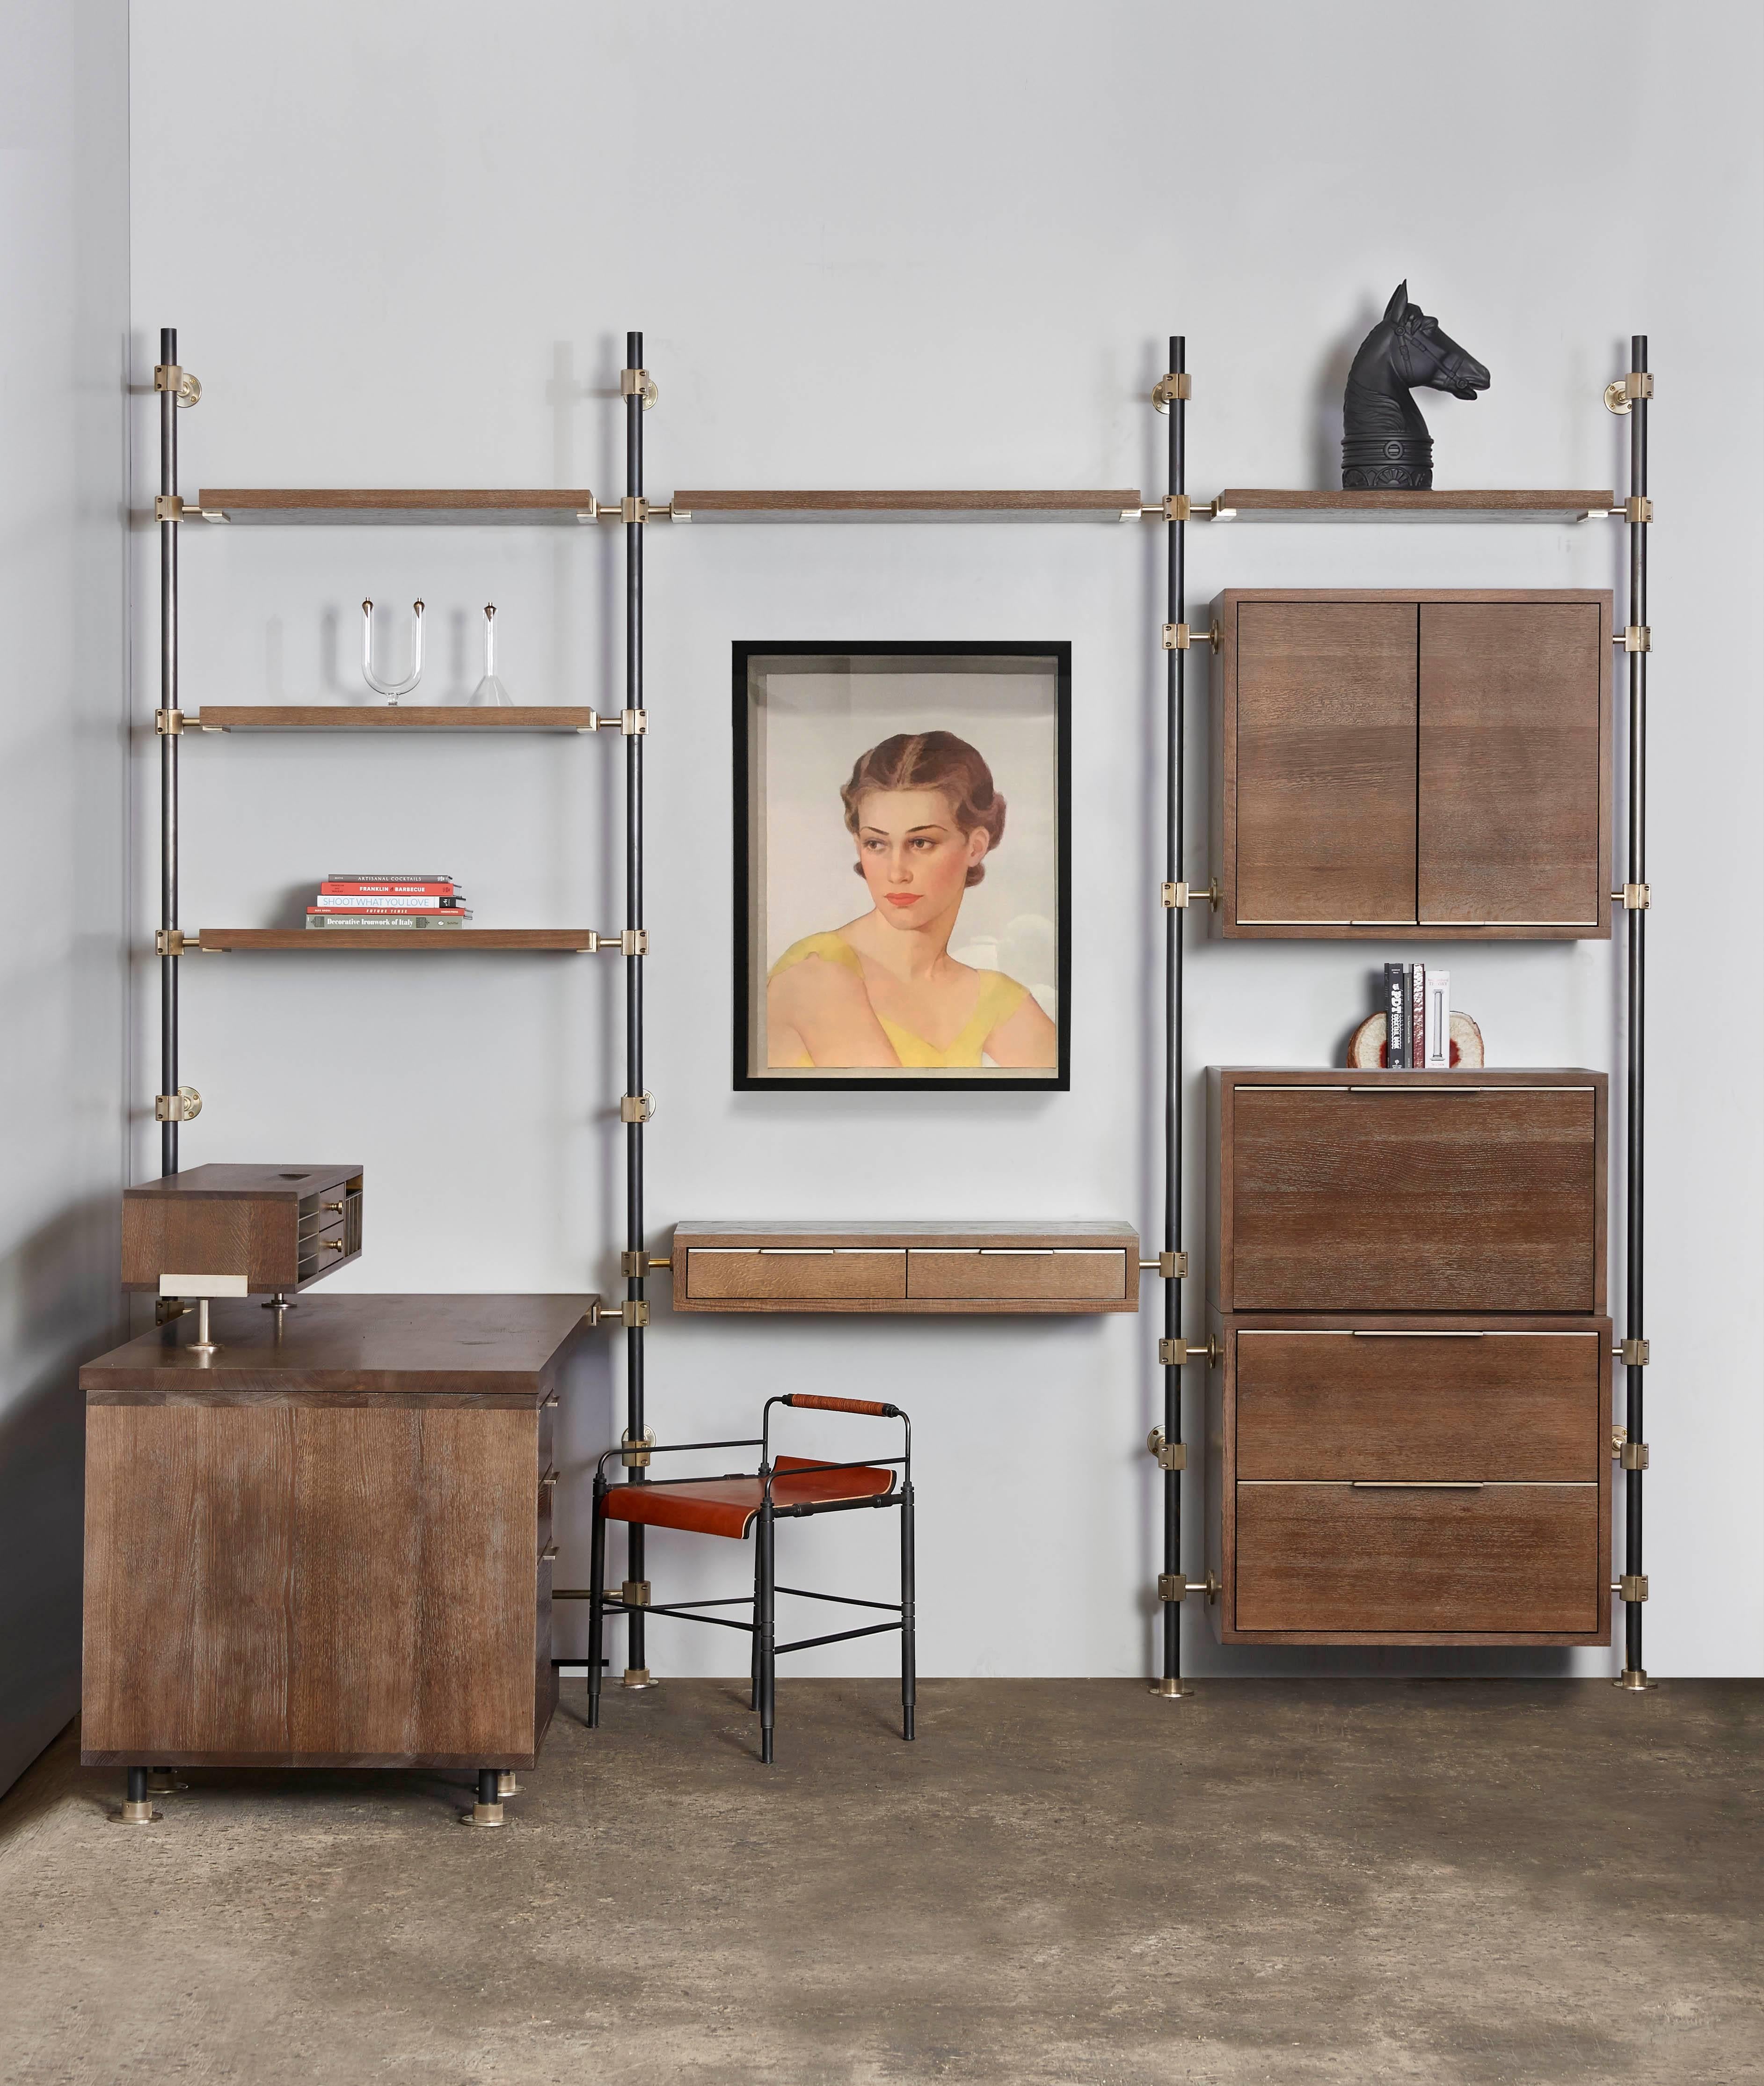 The loft work suite is a modular office system from Amuneal’s Loft shelving system. Posts in blackened steel are coupled with solid brass machined fittings in a champagne finish. The posts mount from floor to wall and the adjustable fittings support